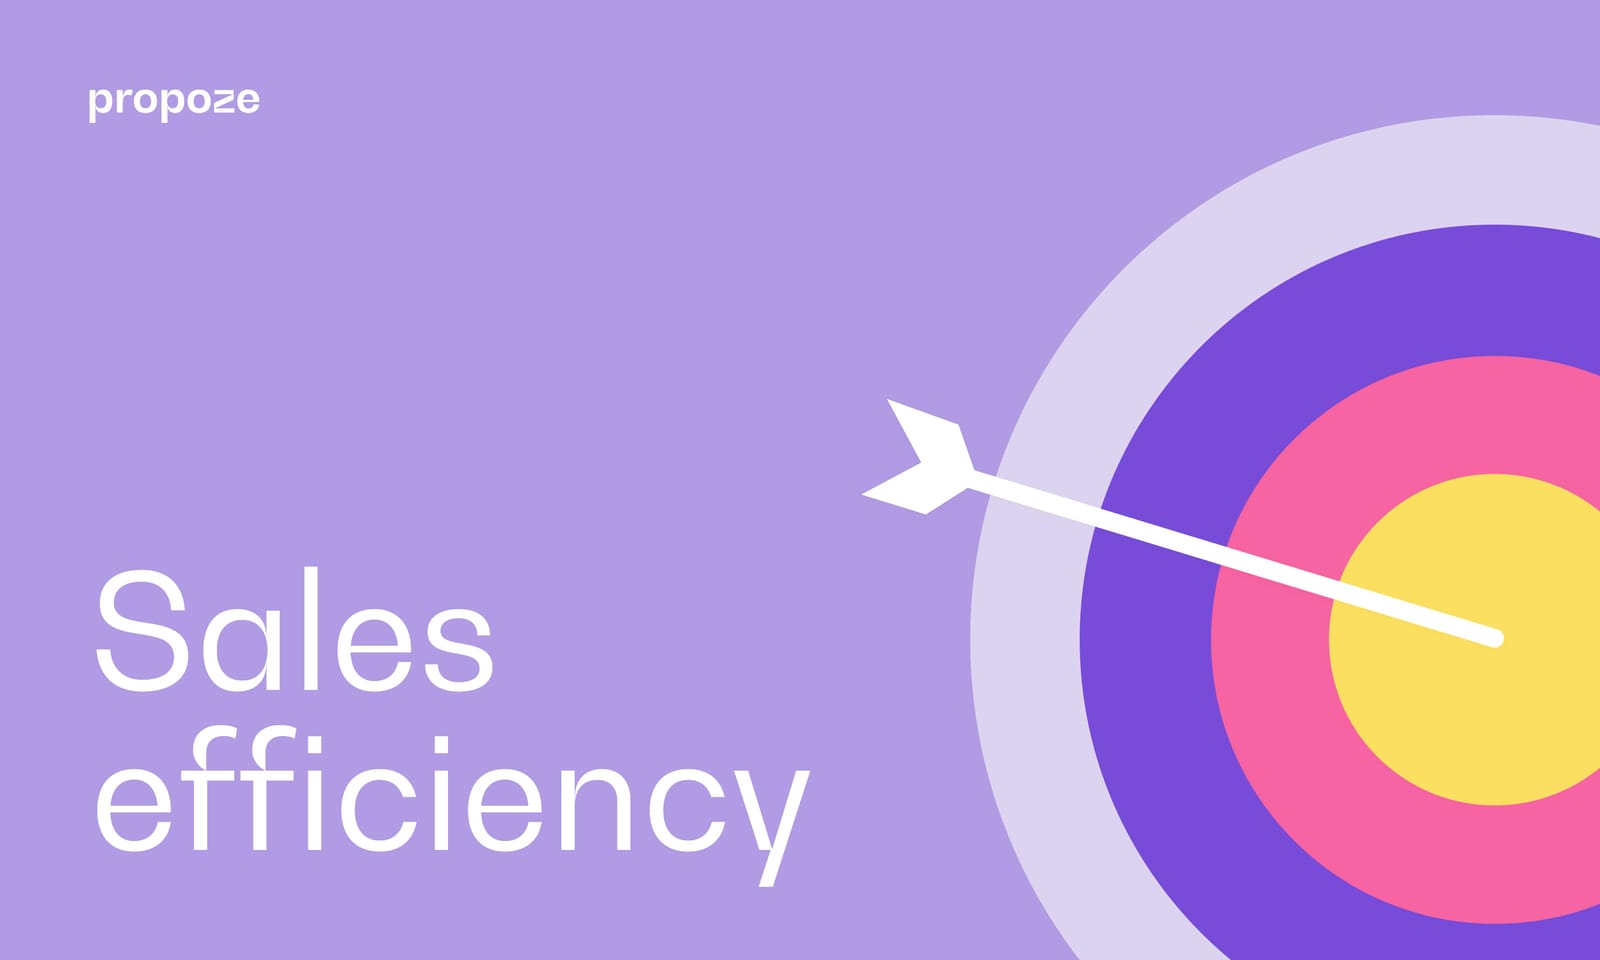 guide to calculating and improving sales efficiency